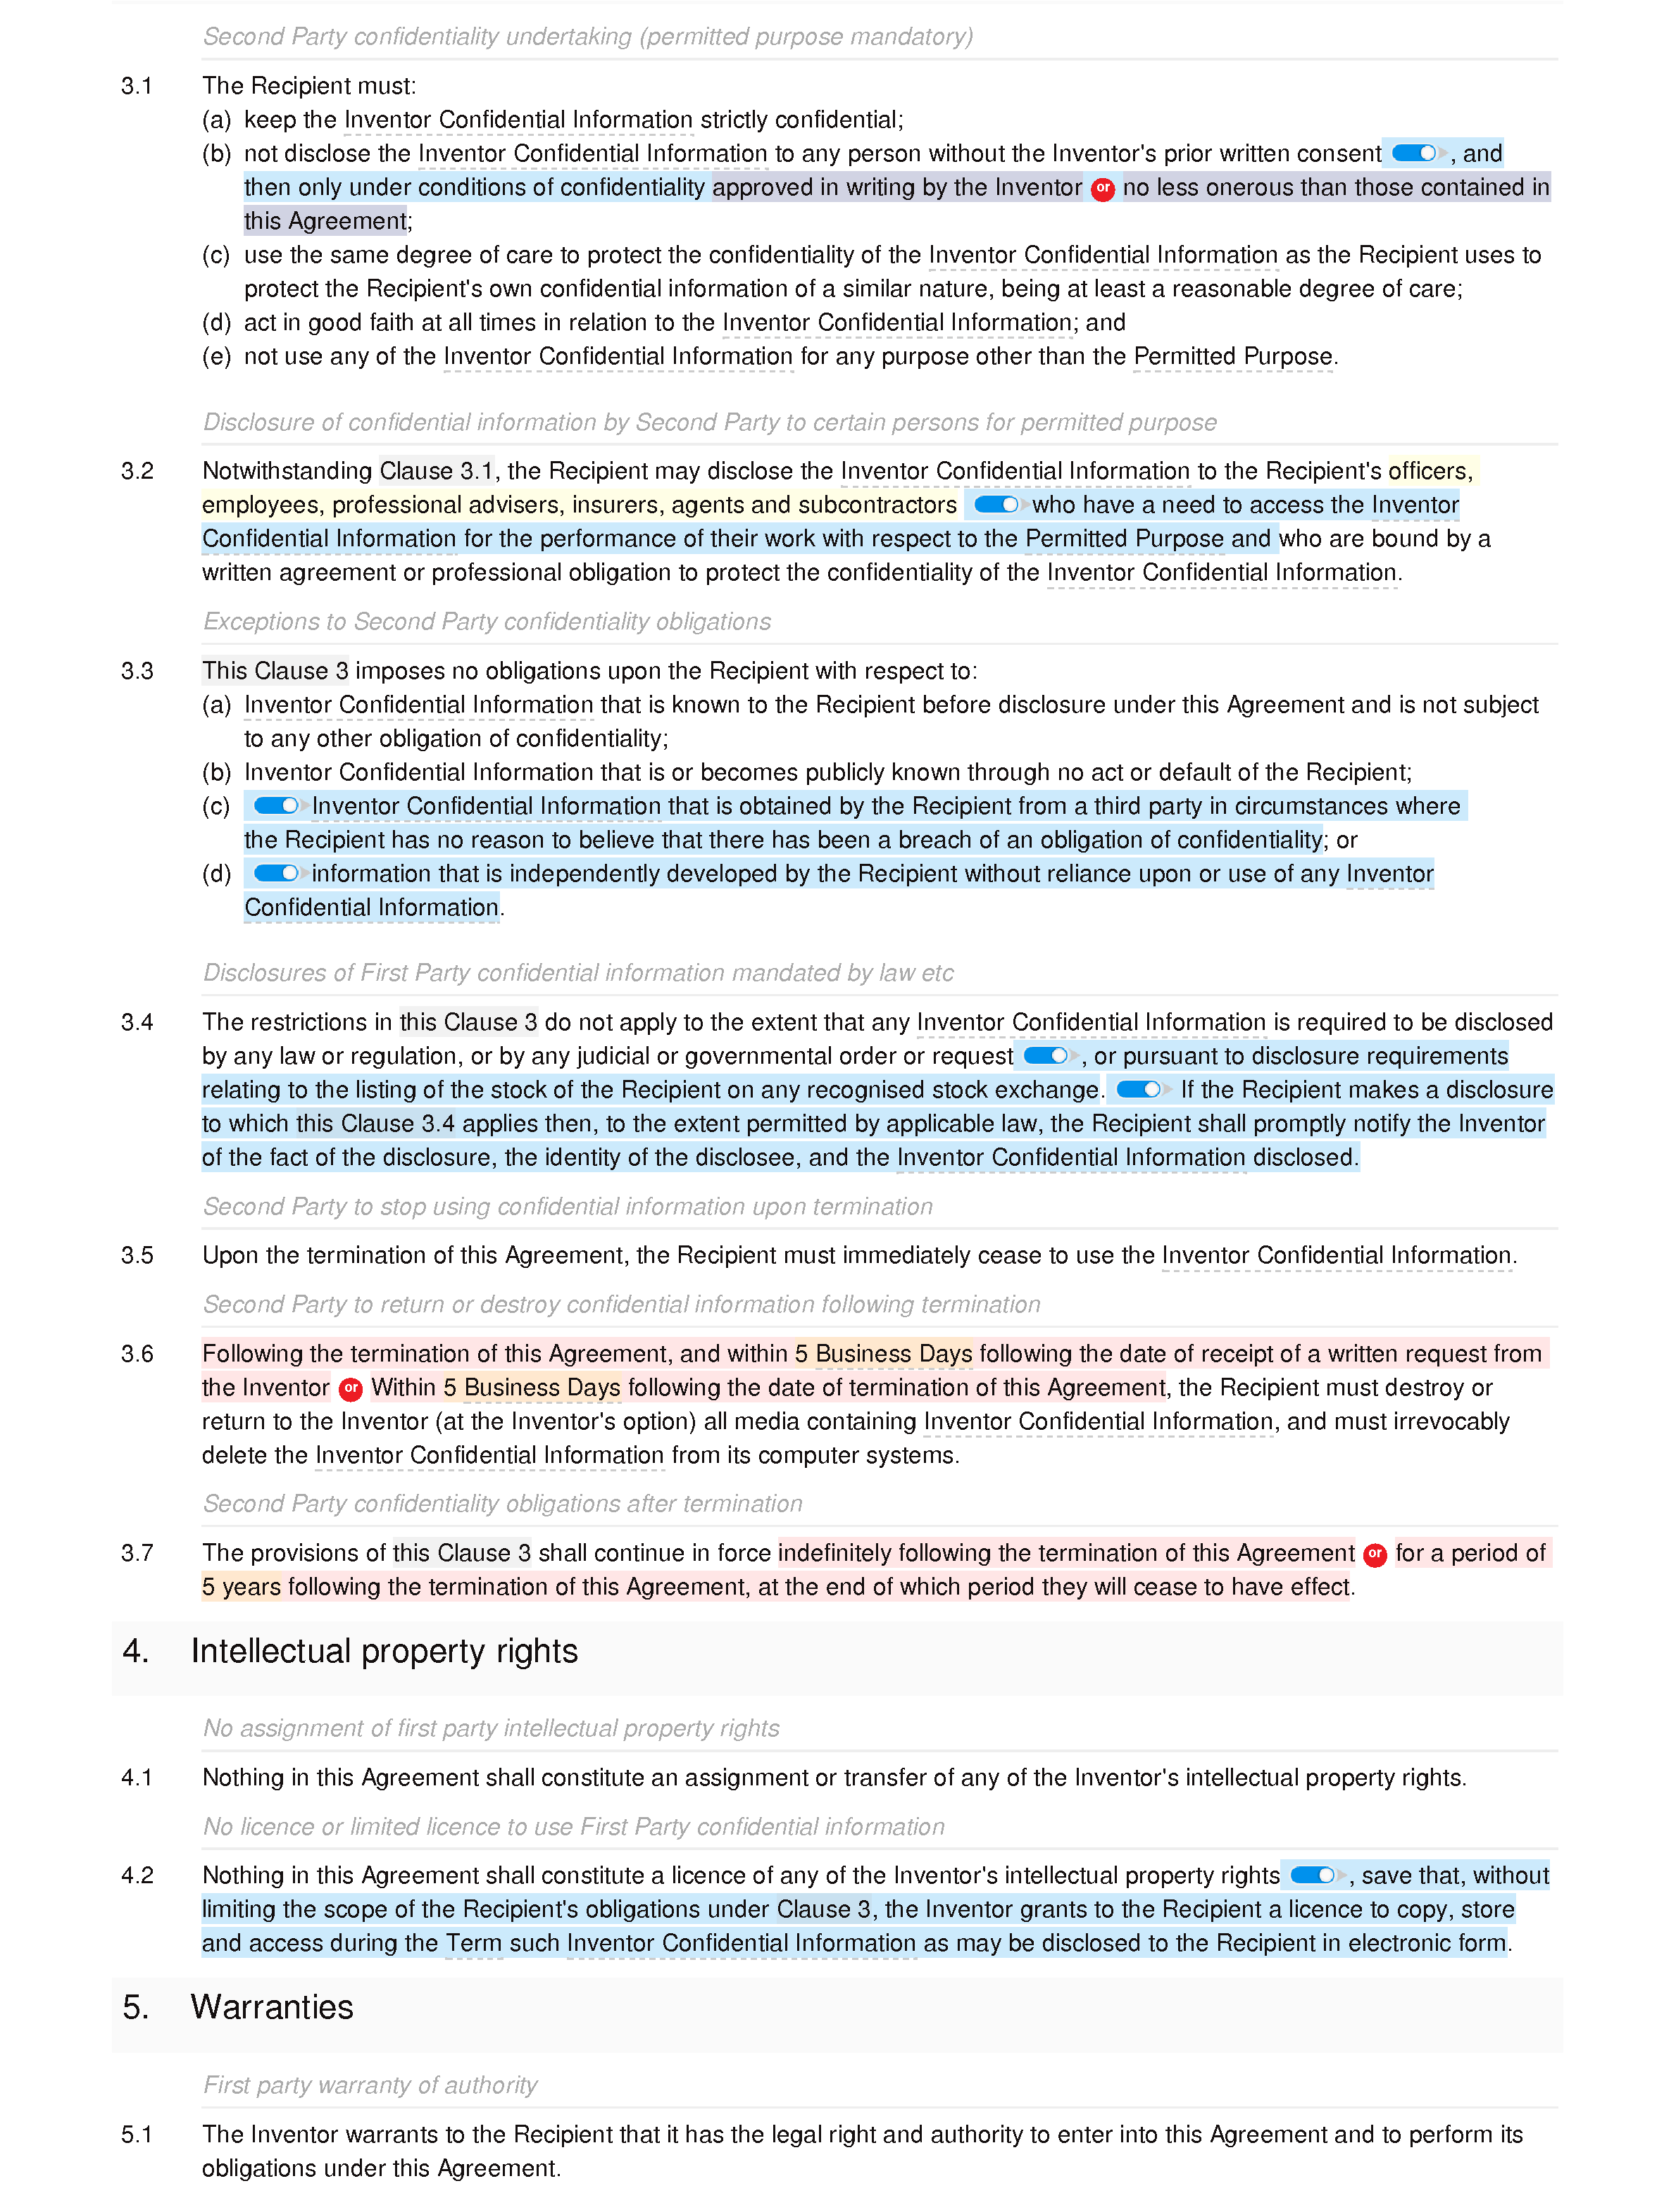 Non-disclosure agreement (invention) document editor preview